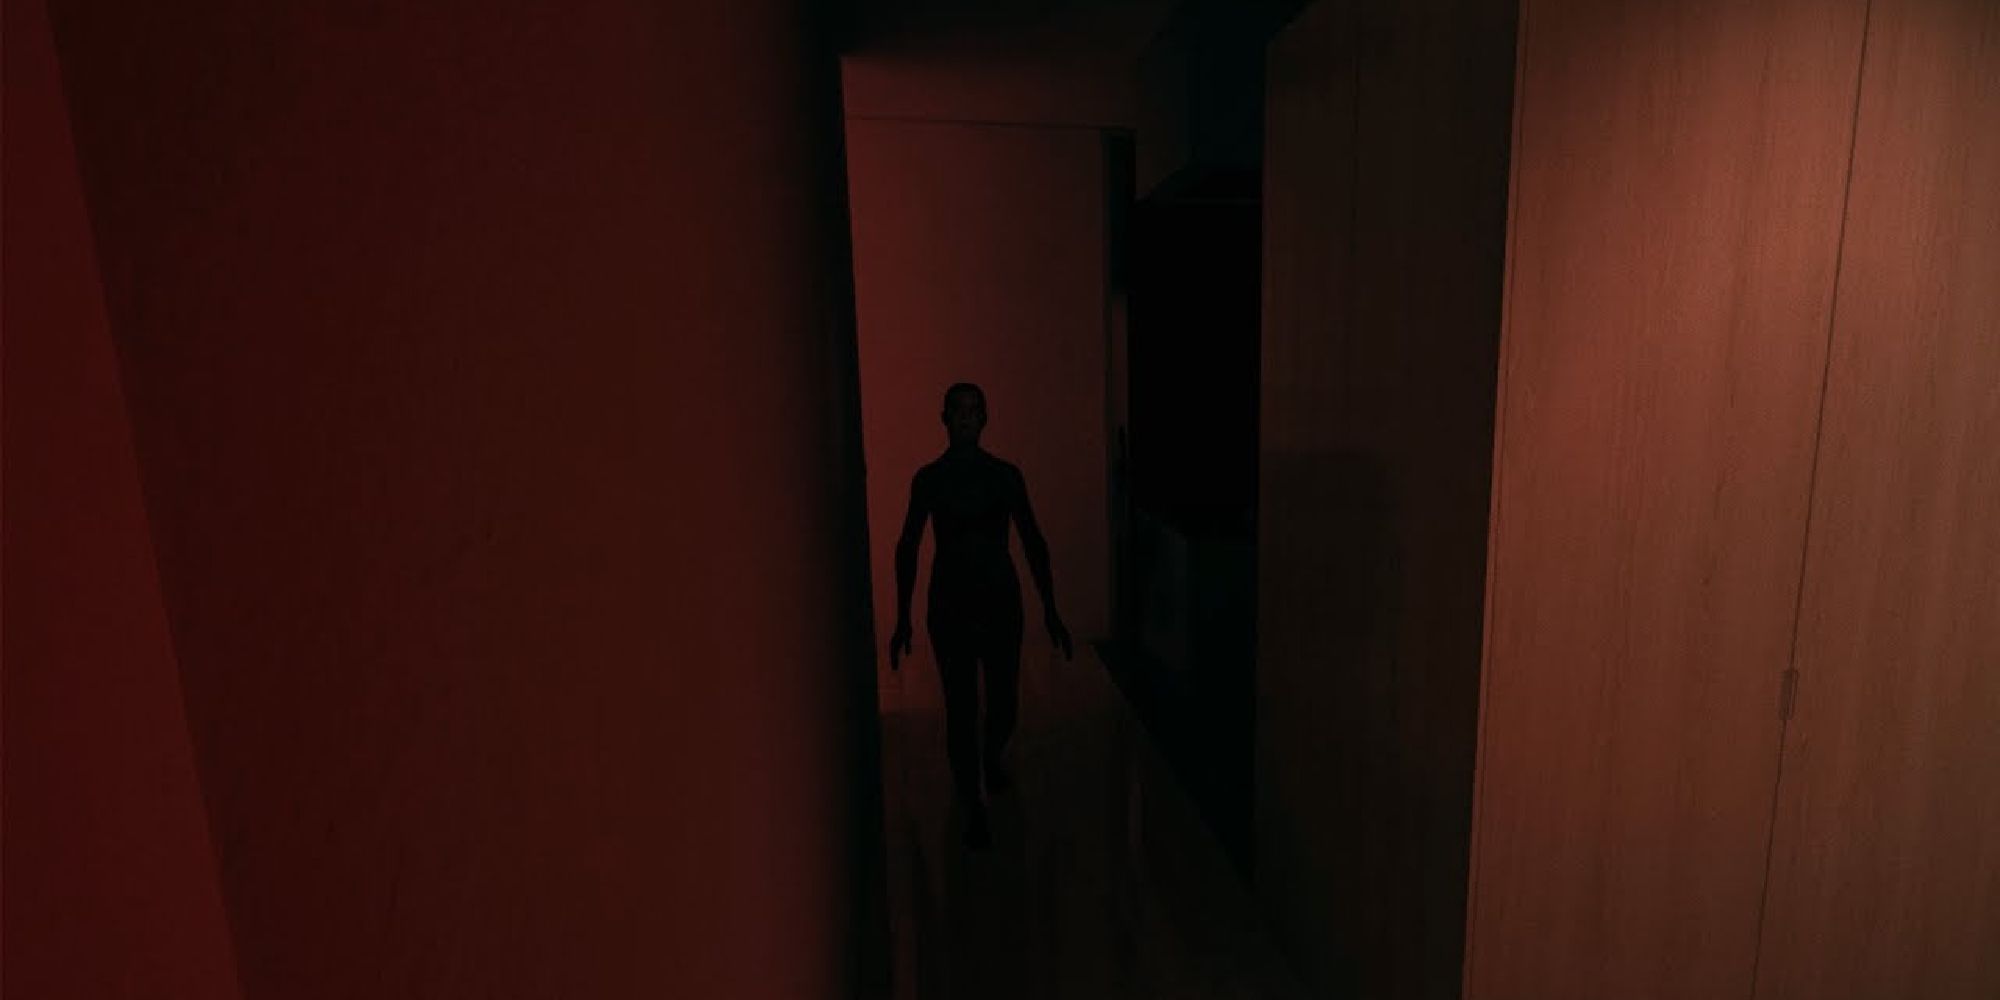 In the red corridor, a figure looms menacingly towards the viewer.